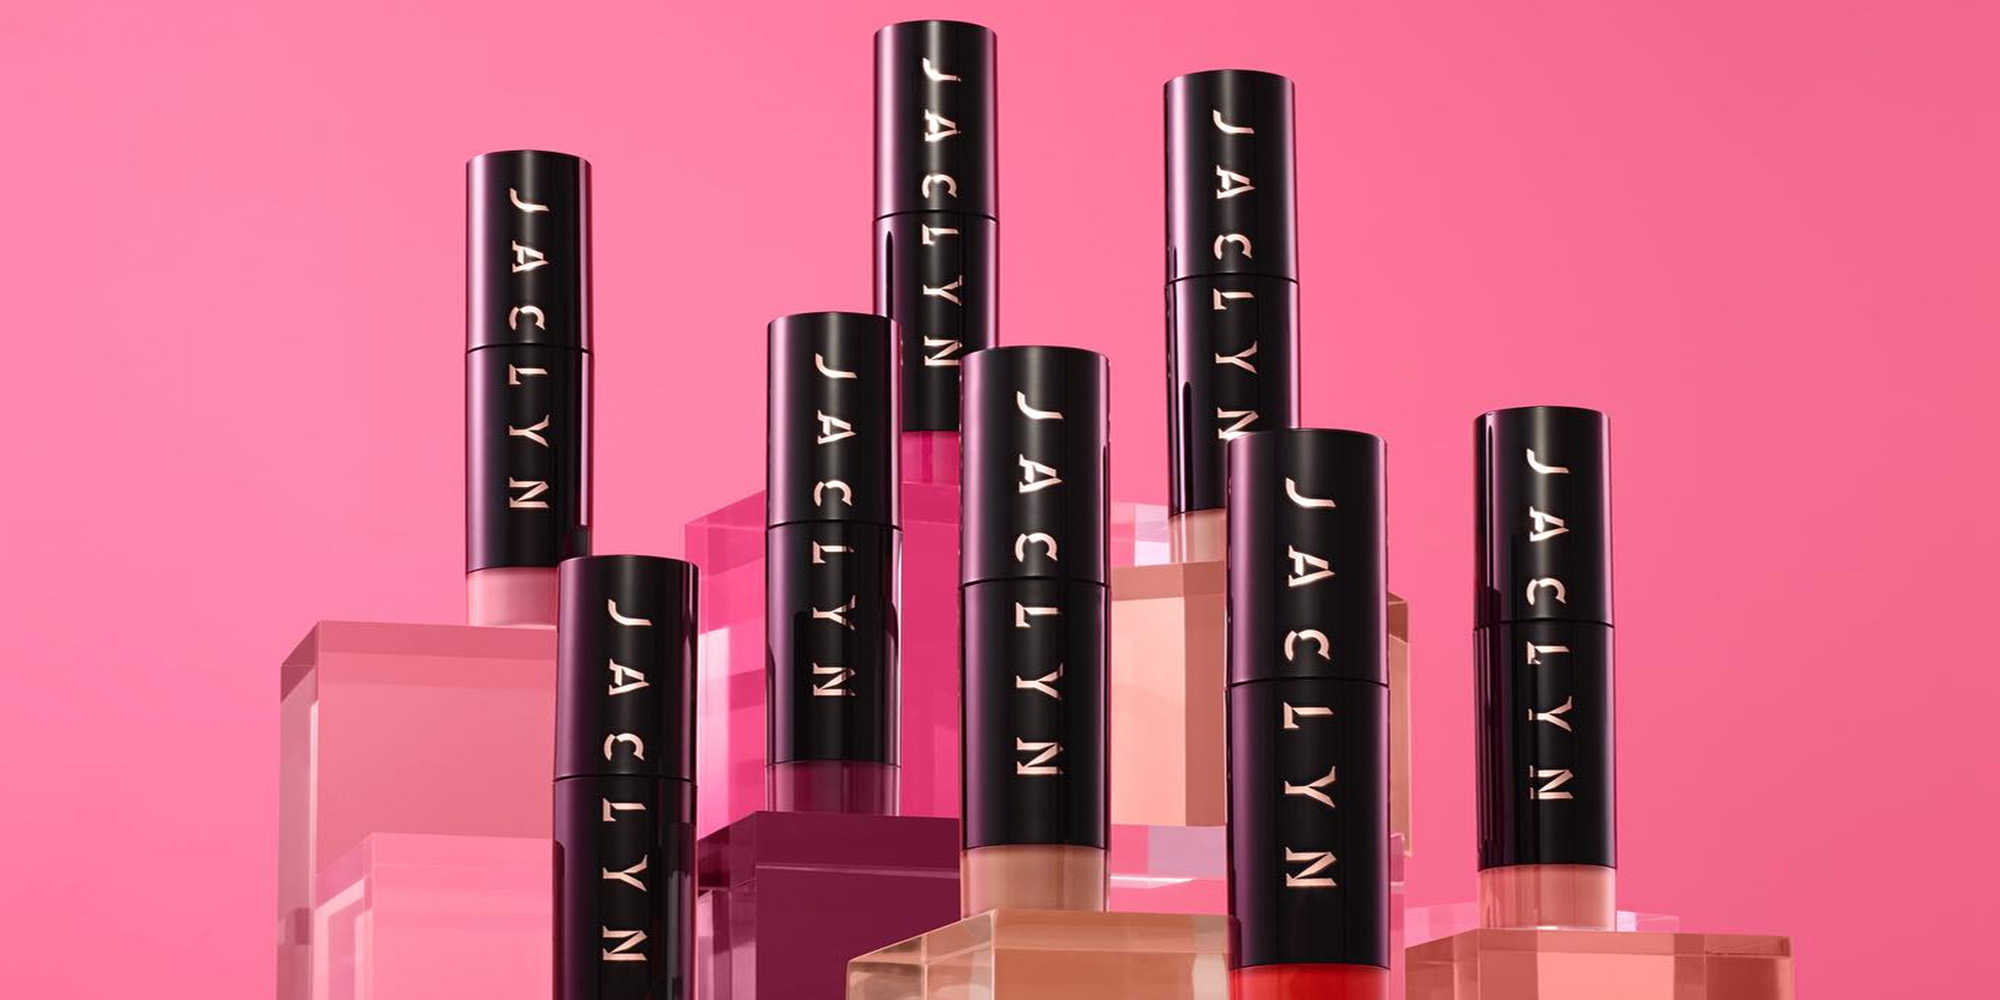 Influencer Jaclyn Hill’s Makeup Brand Jaclyn Cosmetics Closes